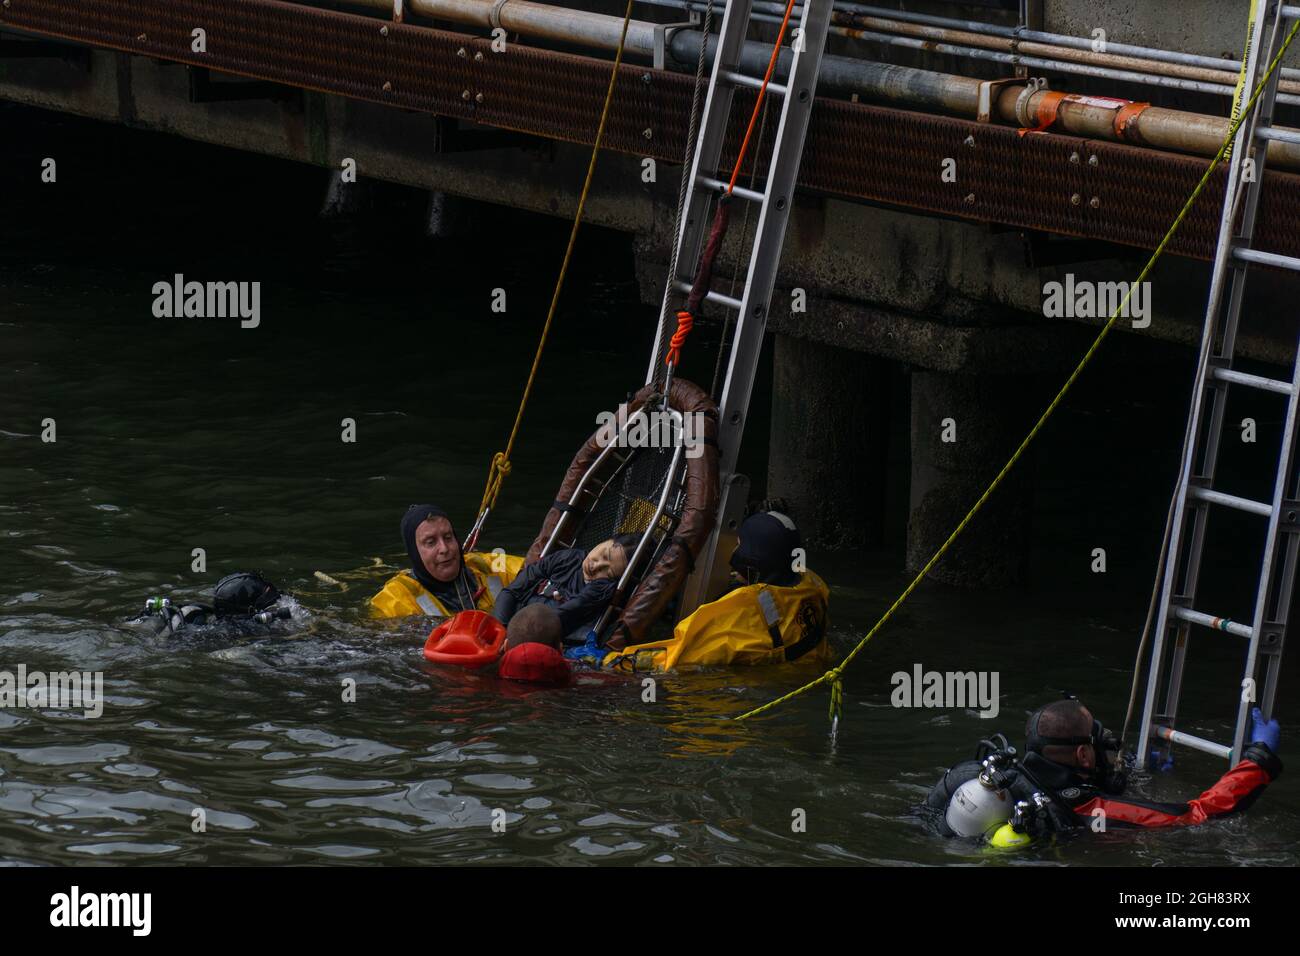 New York City, United States. 05th Sep, 2021. FDNY Marine Unit and NYPD Emergency Service Unit Divers rescue a woman from the water of the East River at the Wall Street Heliport in lower Manhattan. (Photo by Steve Sanchez/Pacific Press) Credit: Pacific Press Media Production Corp./Alamy Live News Stock Photo